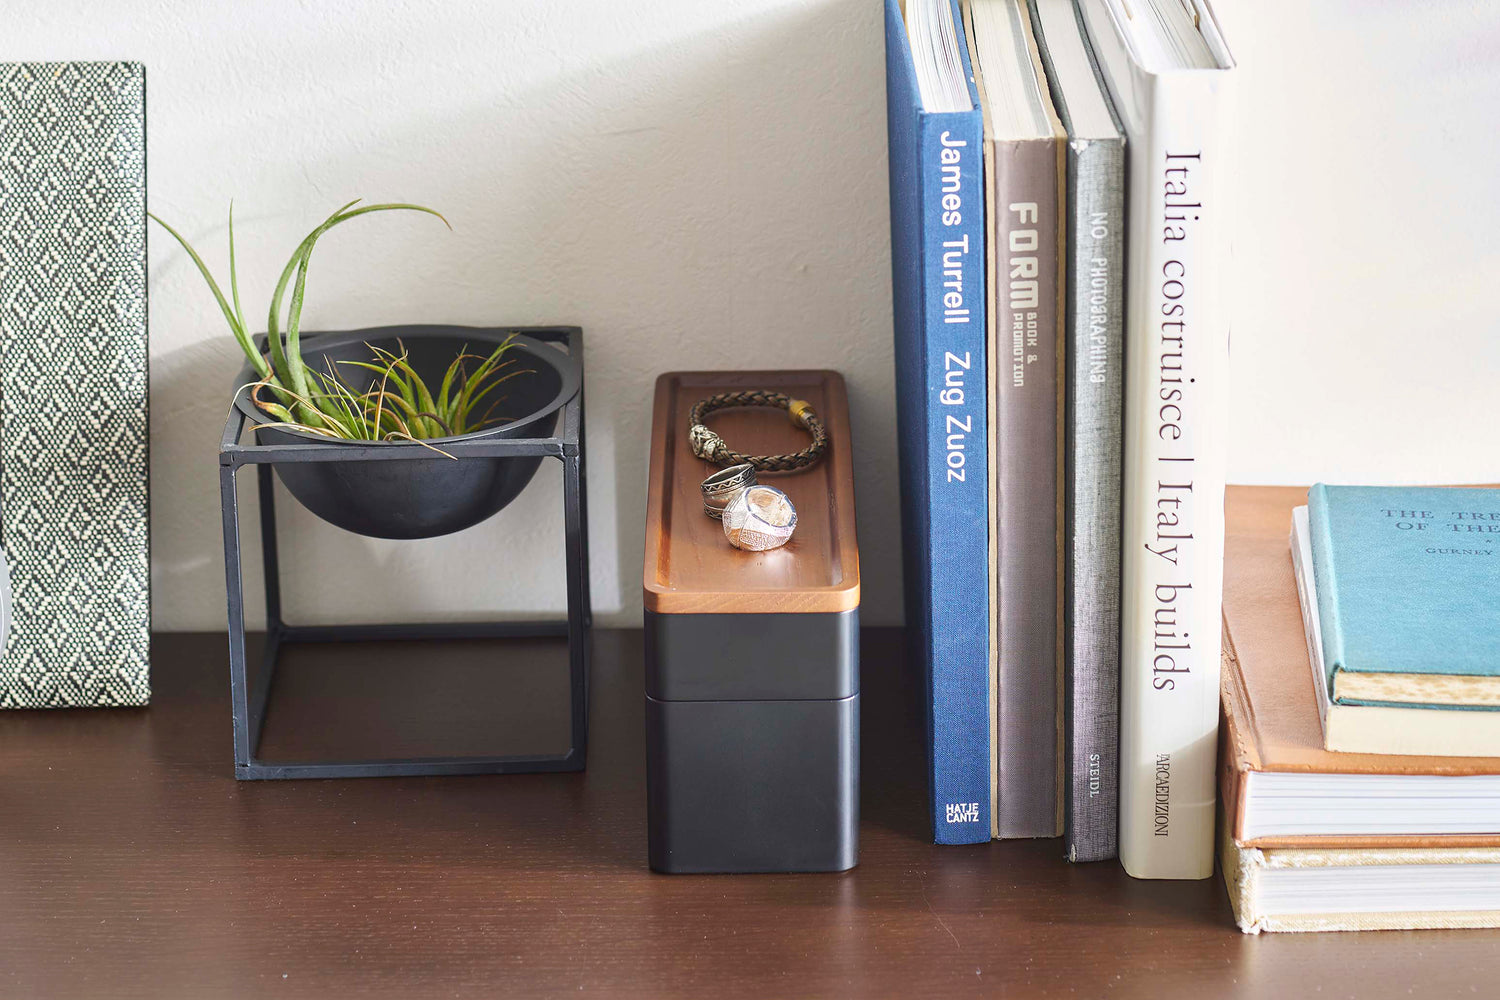 View 28 - Closed Black Stacking Watch and Accessory Case in between books and plants